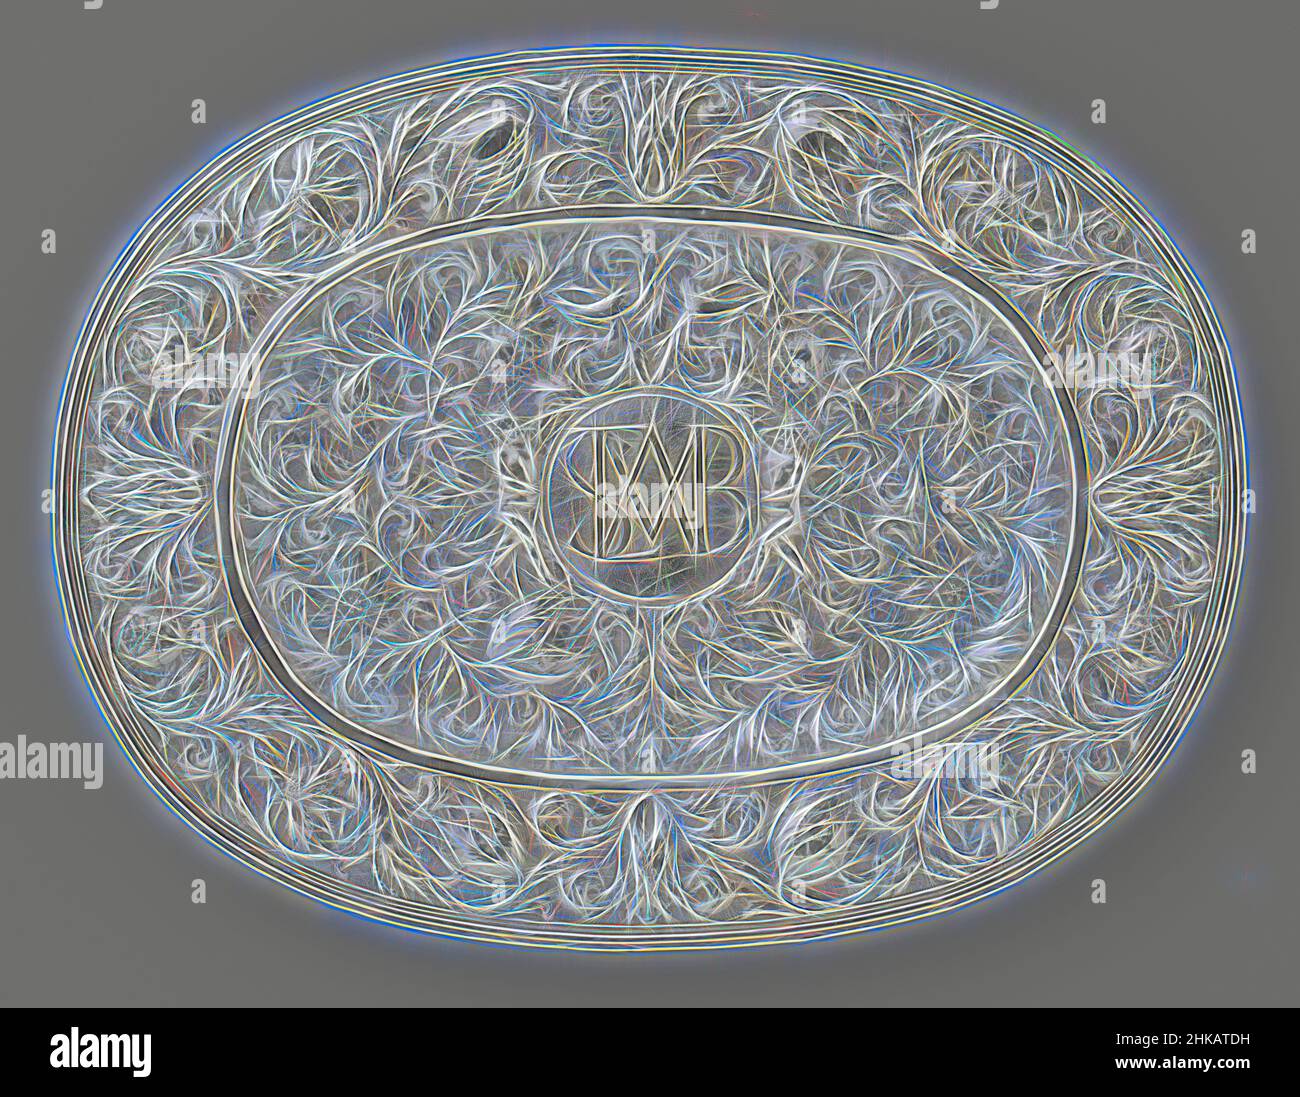 Inspired by Lampet dish, oval and entirely driven with flower tendrils, with in the center of the rim a medallion with monogram, consisting of the letters SLMVB, Lampet dish, oval and entirely driven with flower tendrils. In the center of the edge of the oval dish, which is bordered by a wire profile, Reimagined by Artotop. Classic art reinvented with a modern twist. Design of warm cheerful glowing of brightness and light ray radiance. Photography inspired by surrealism and futurism, embracing dynamic energy of modern technology, movement, speed and revolutionize culture Stock Photo